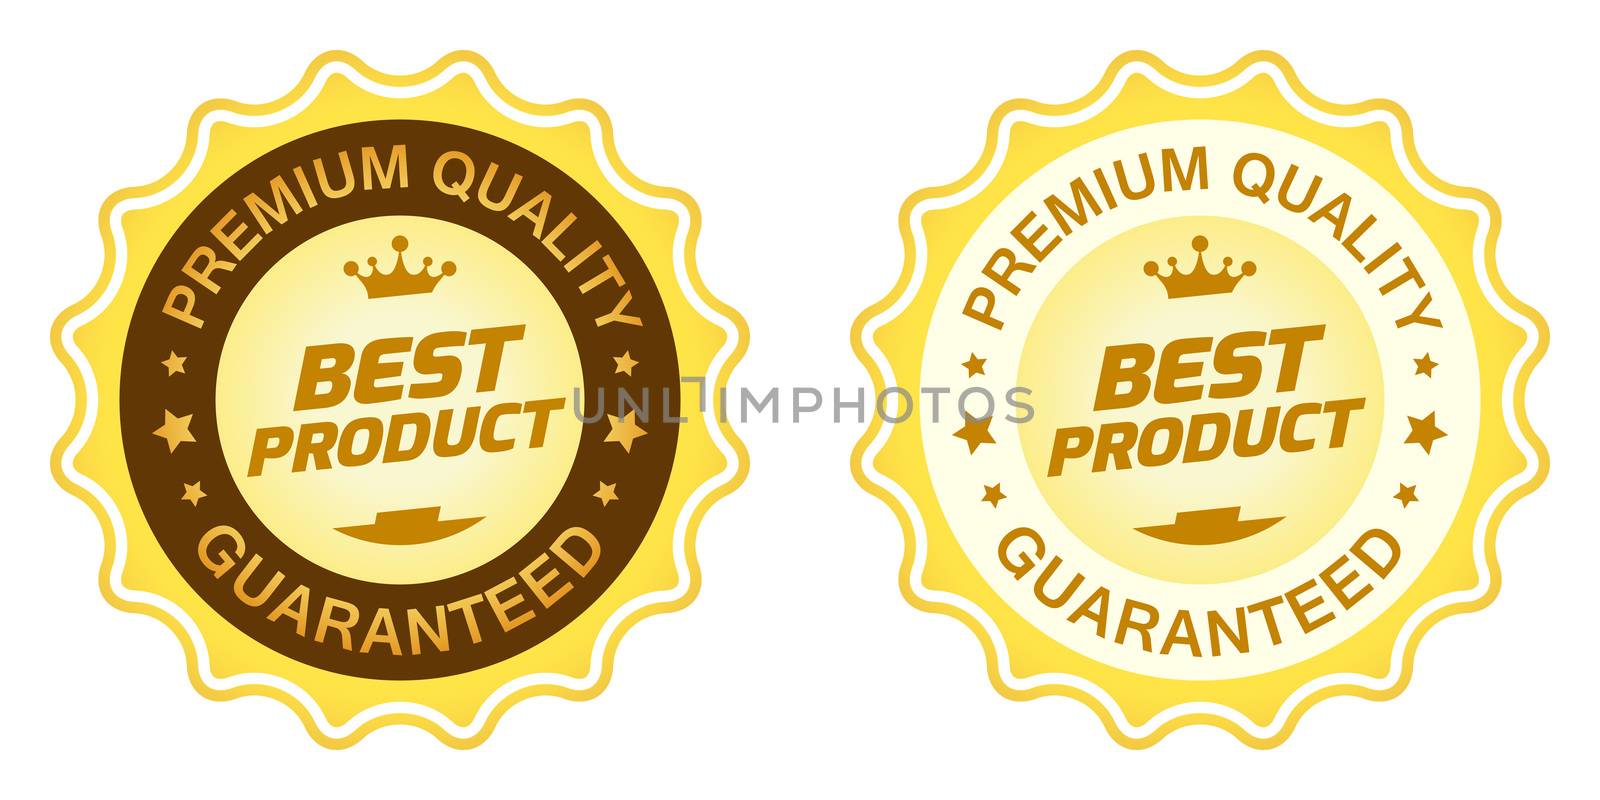 Best Product Label isolated on white background